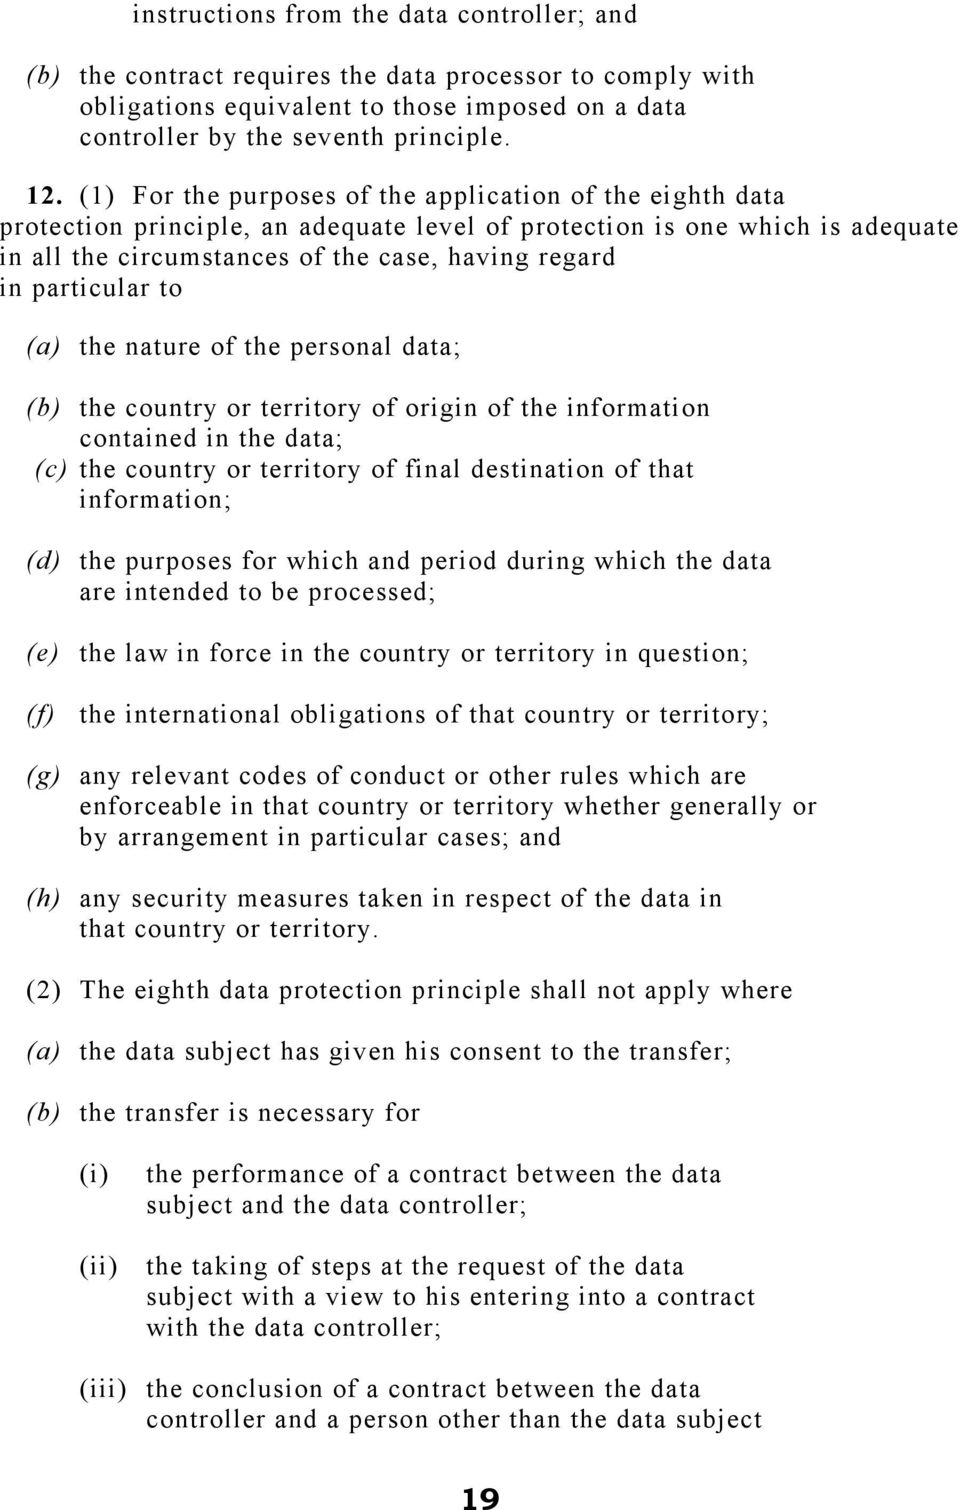 particular to (a) the nature of the personal data; (b) the country or territory of origin of the information contained in the data; (c) the country or territory of final destination of that